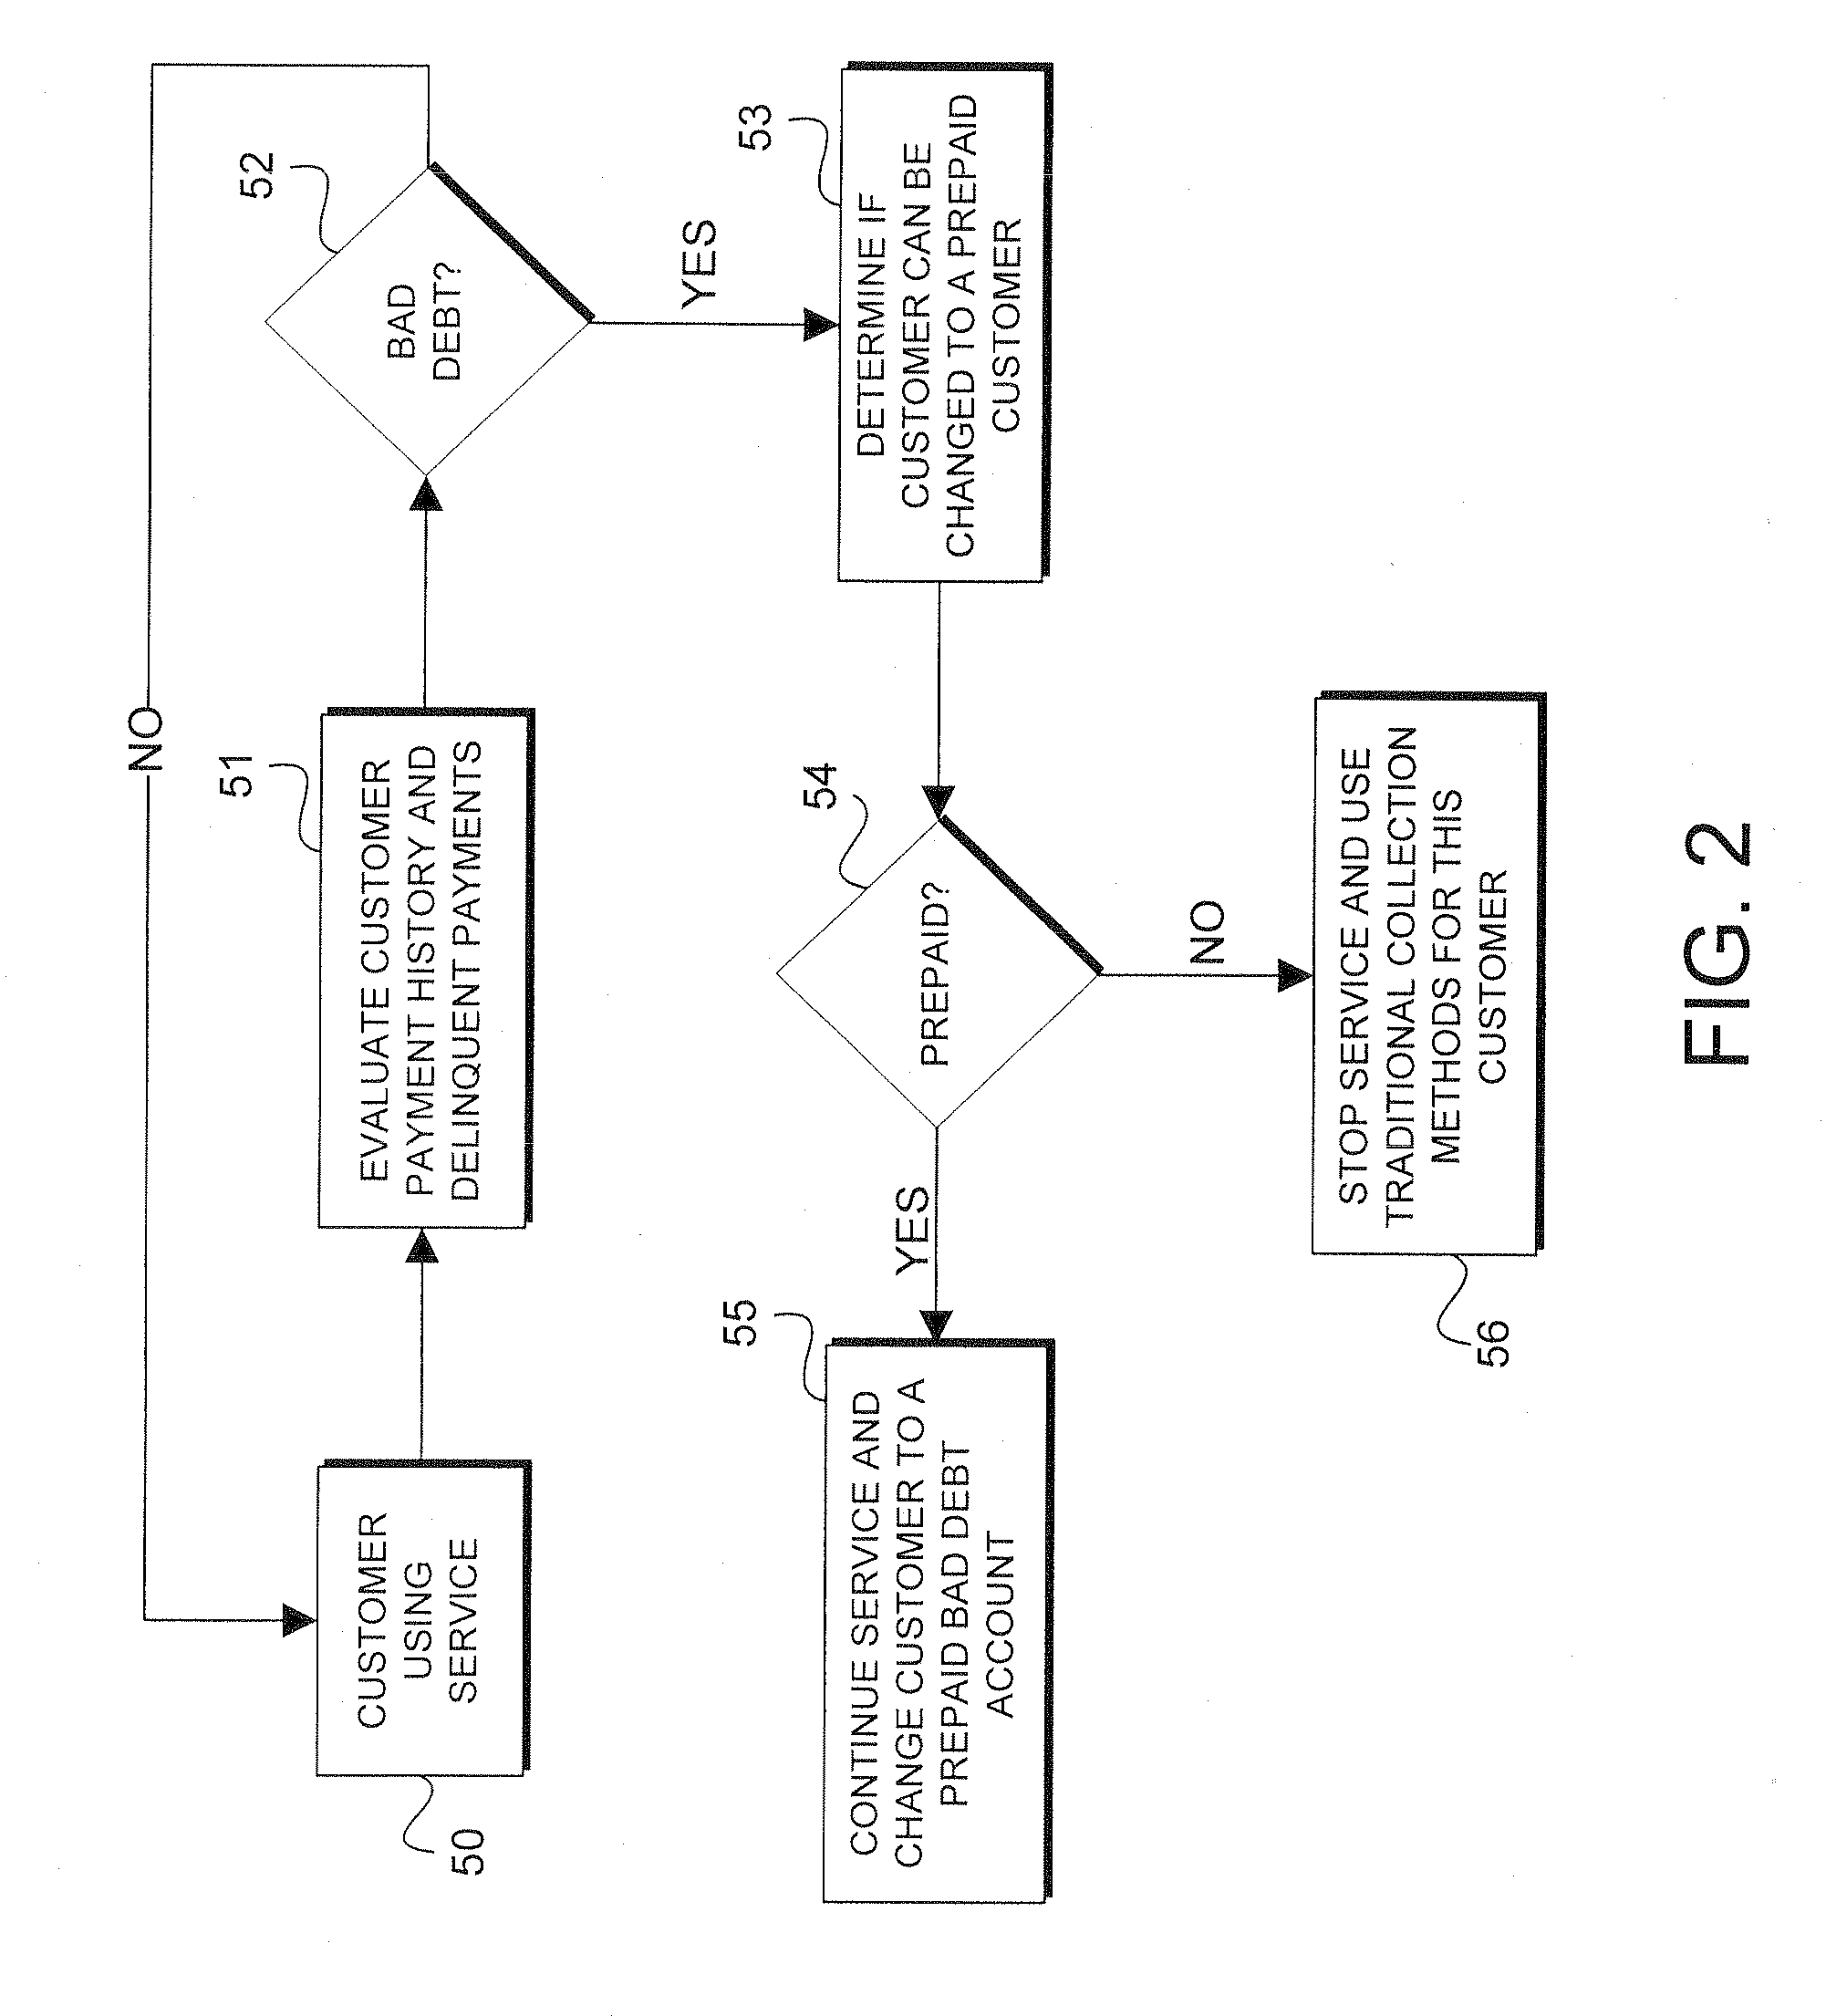 Bad debt recovery system and method in a prepaid services environment